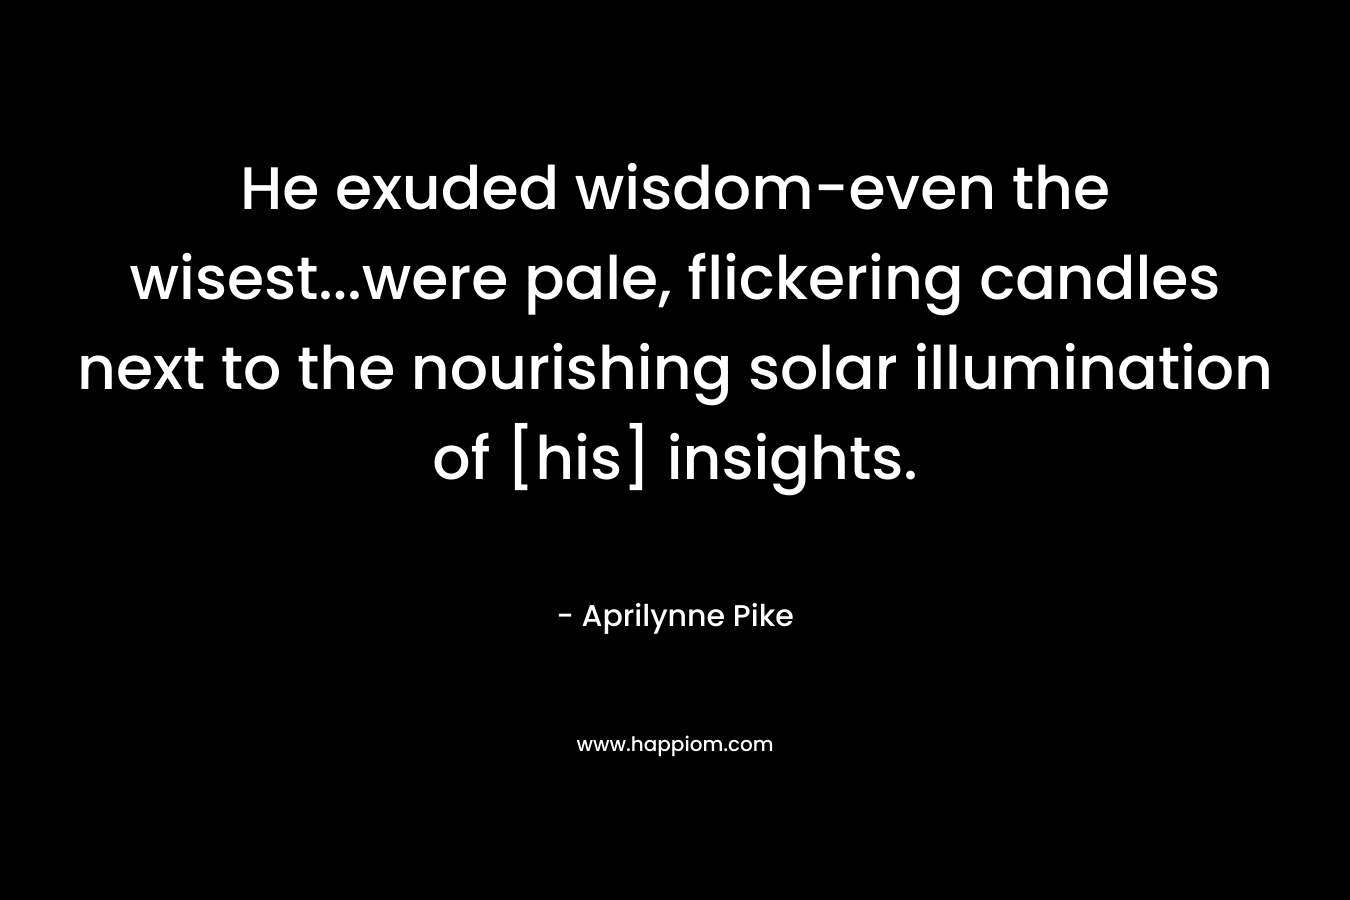 He exuded wisdom-even the wisest…were pale, flickering candles next to the nourishing solar illumination of [his] insights. – Aprilynne Pike